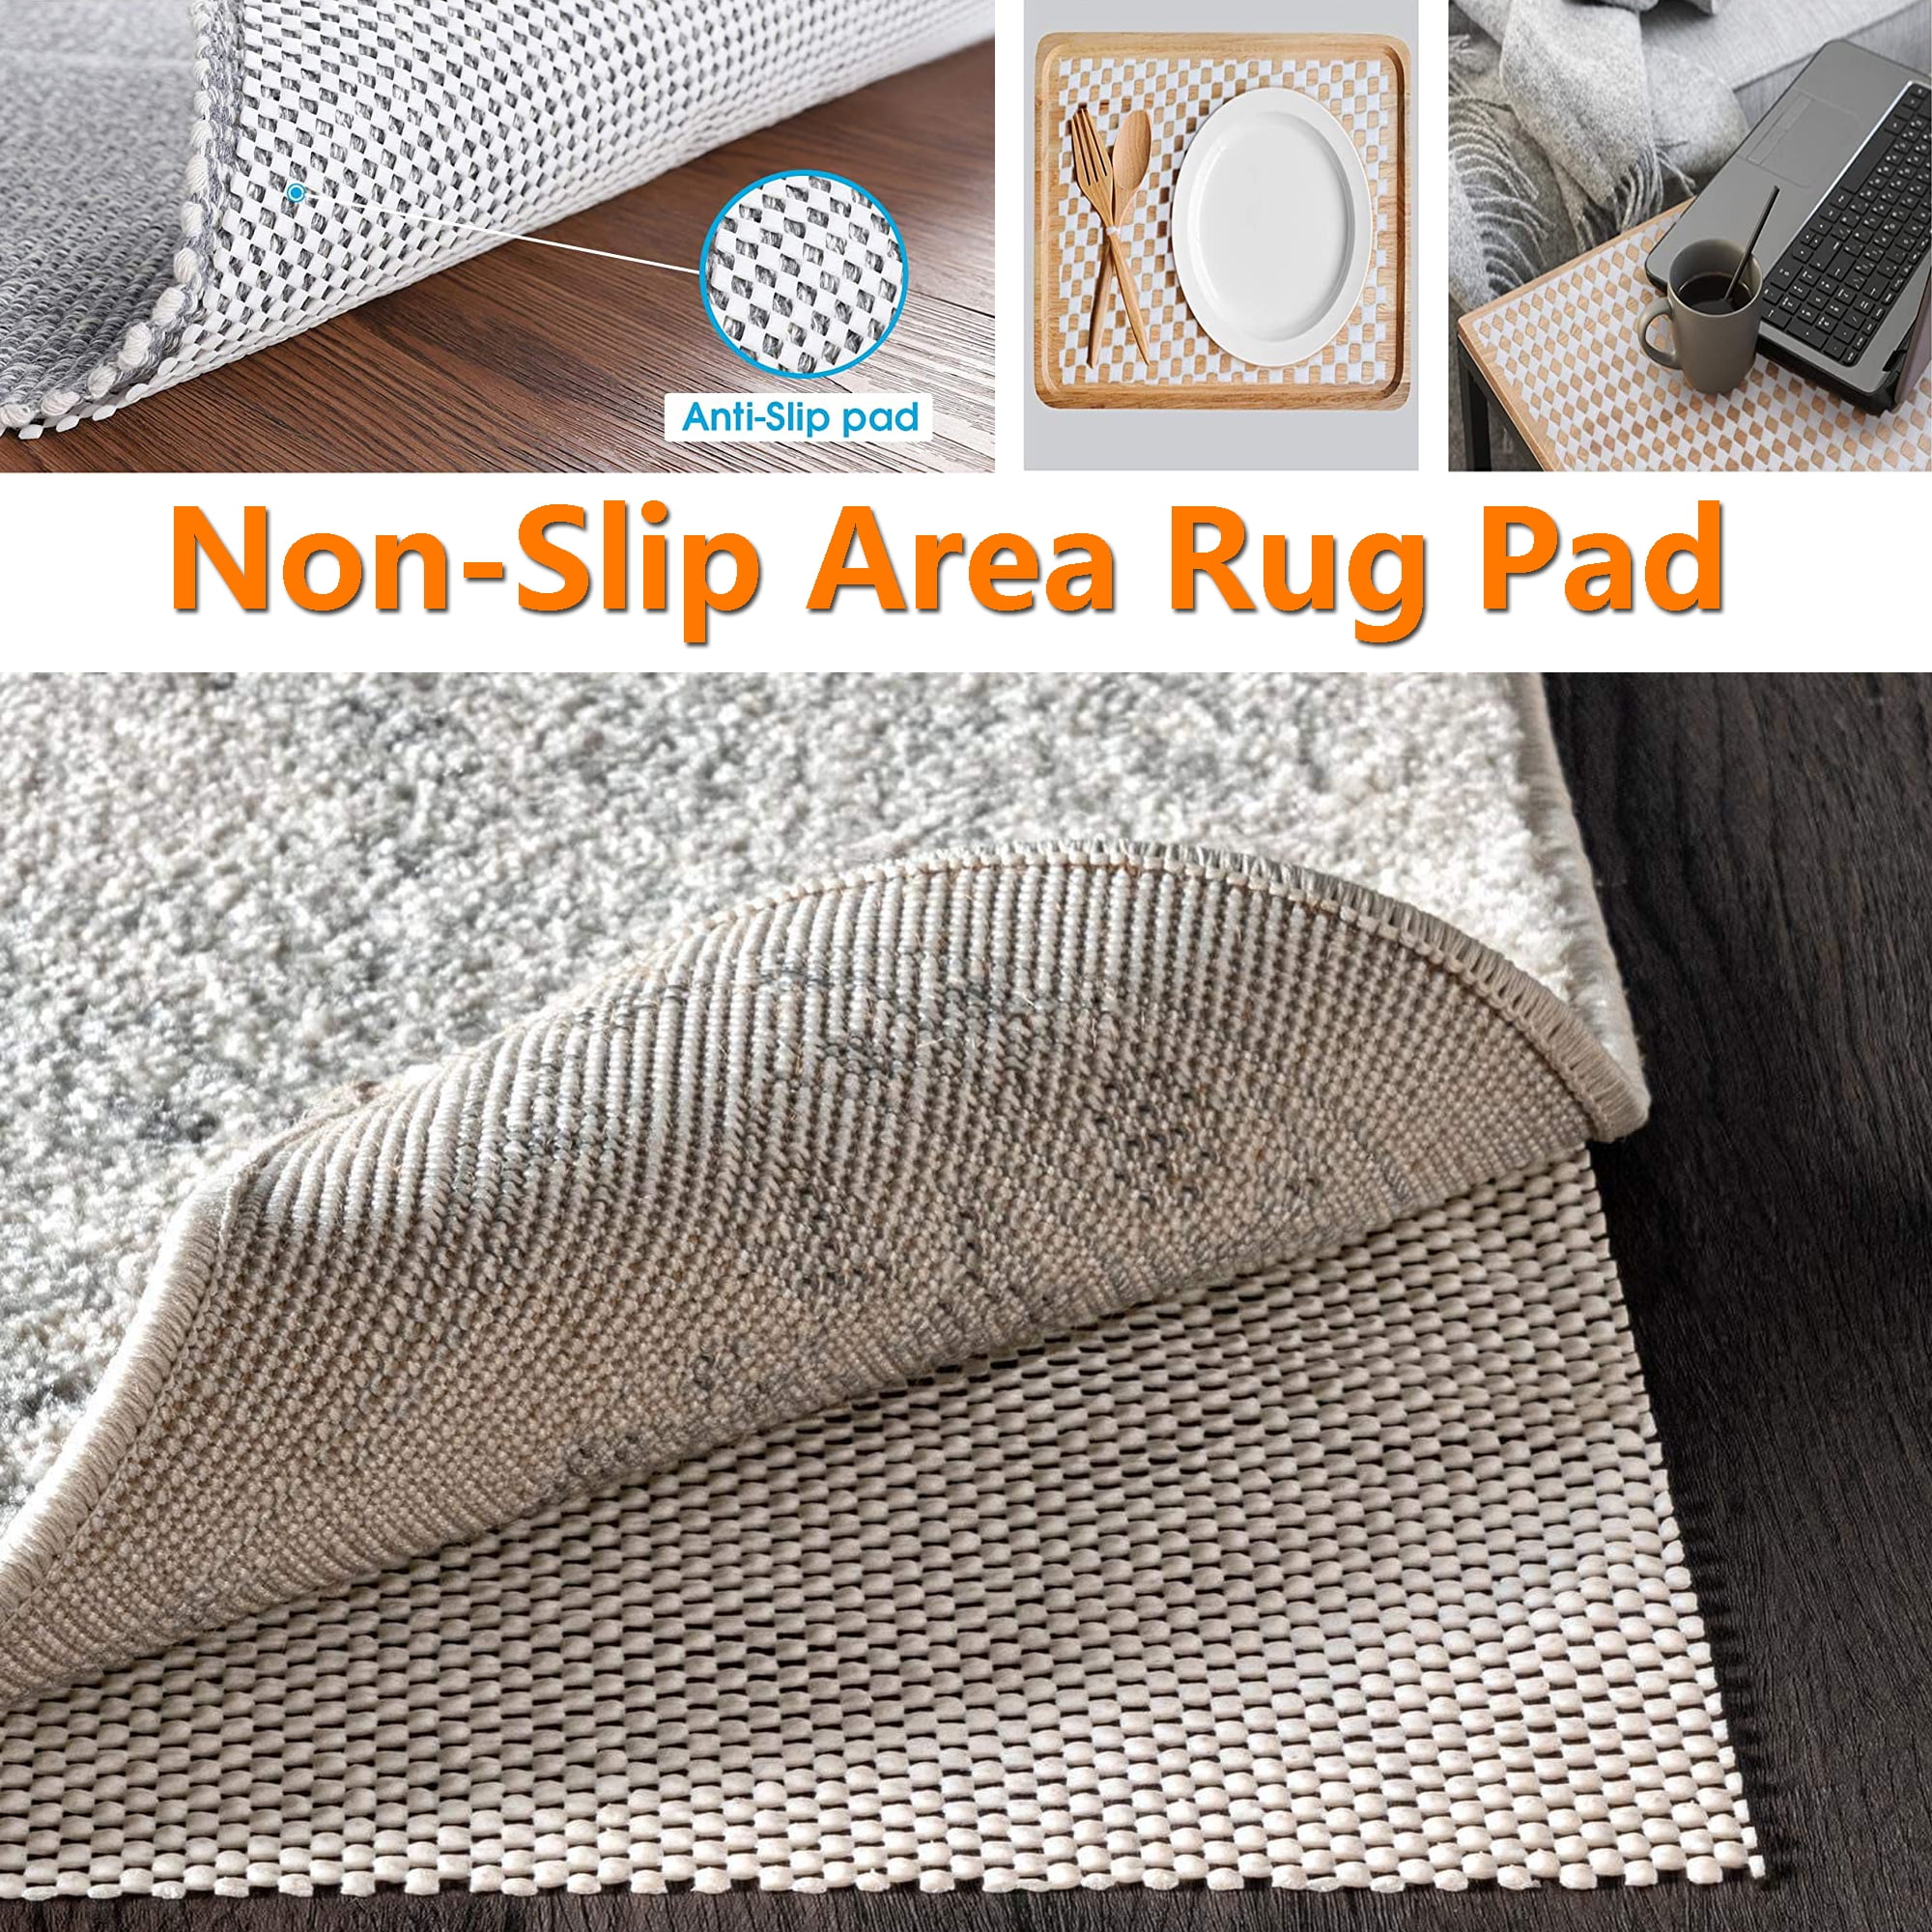  Veken 4x6 Rug Pad Gripper for Hardwood Floors, Non Slip Rug  Pads for Area Rugs, Thick Rug Grippers for Tile Floors, Under Carpet Anti  Skid Mat, Keep Your Rugs Safe and